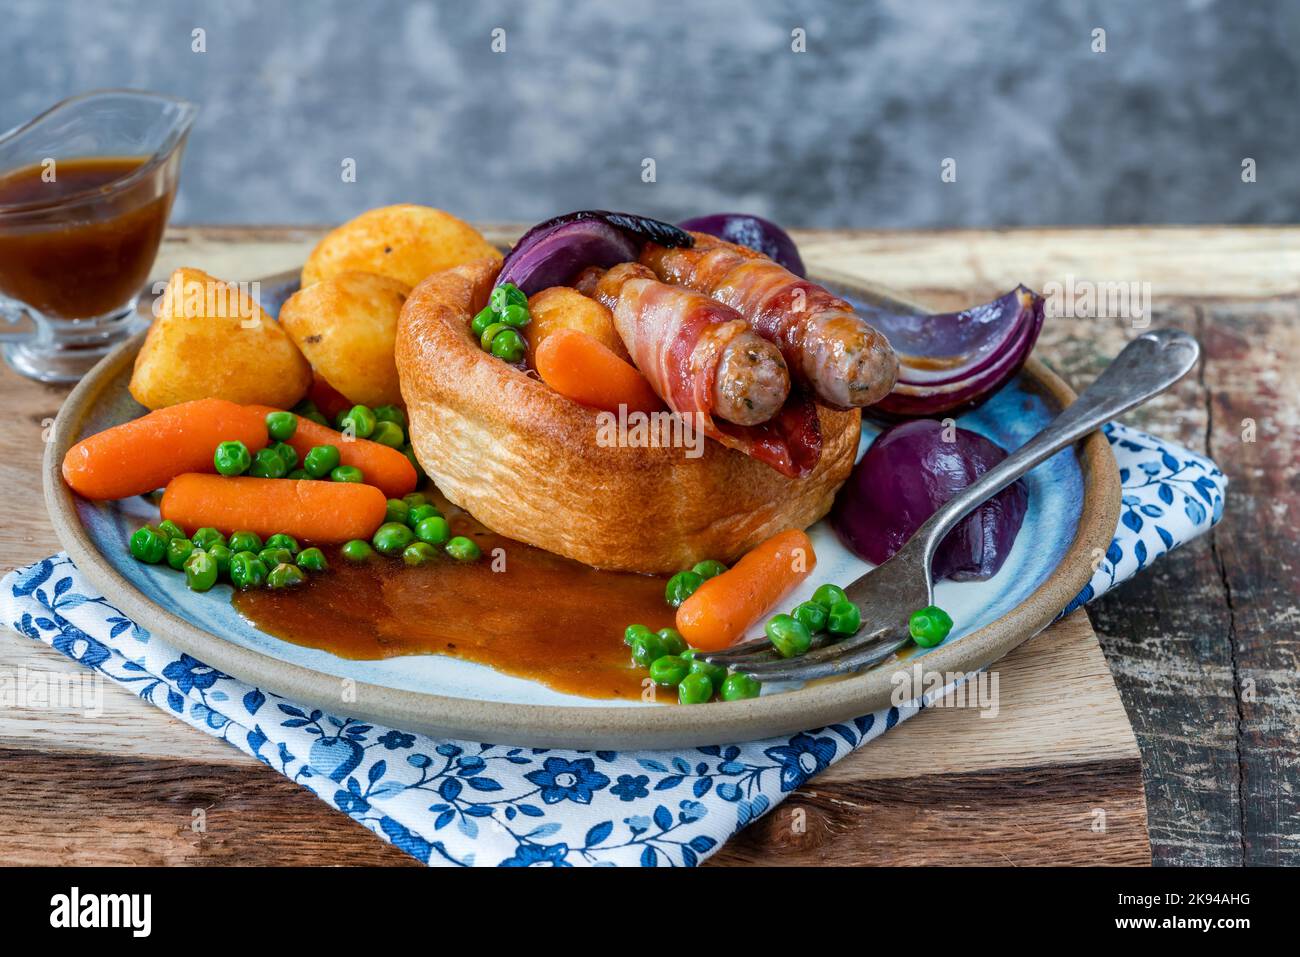 Toad in the hole with Yorkshire pudding, sausages and vegetables Stock Photo